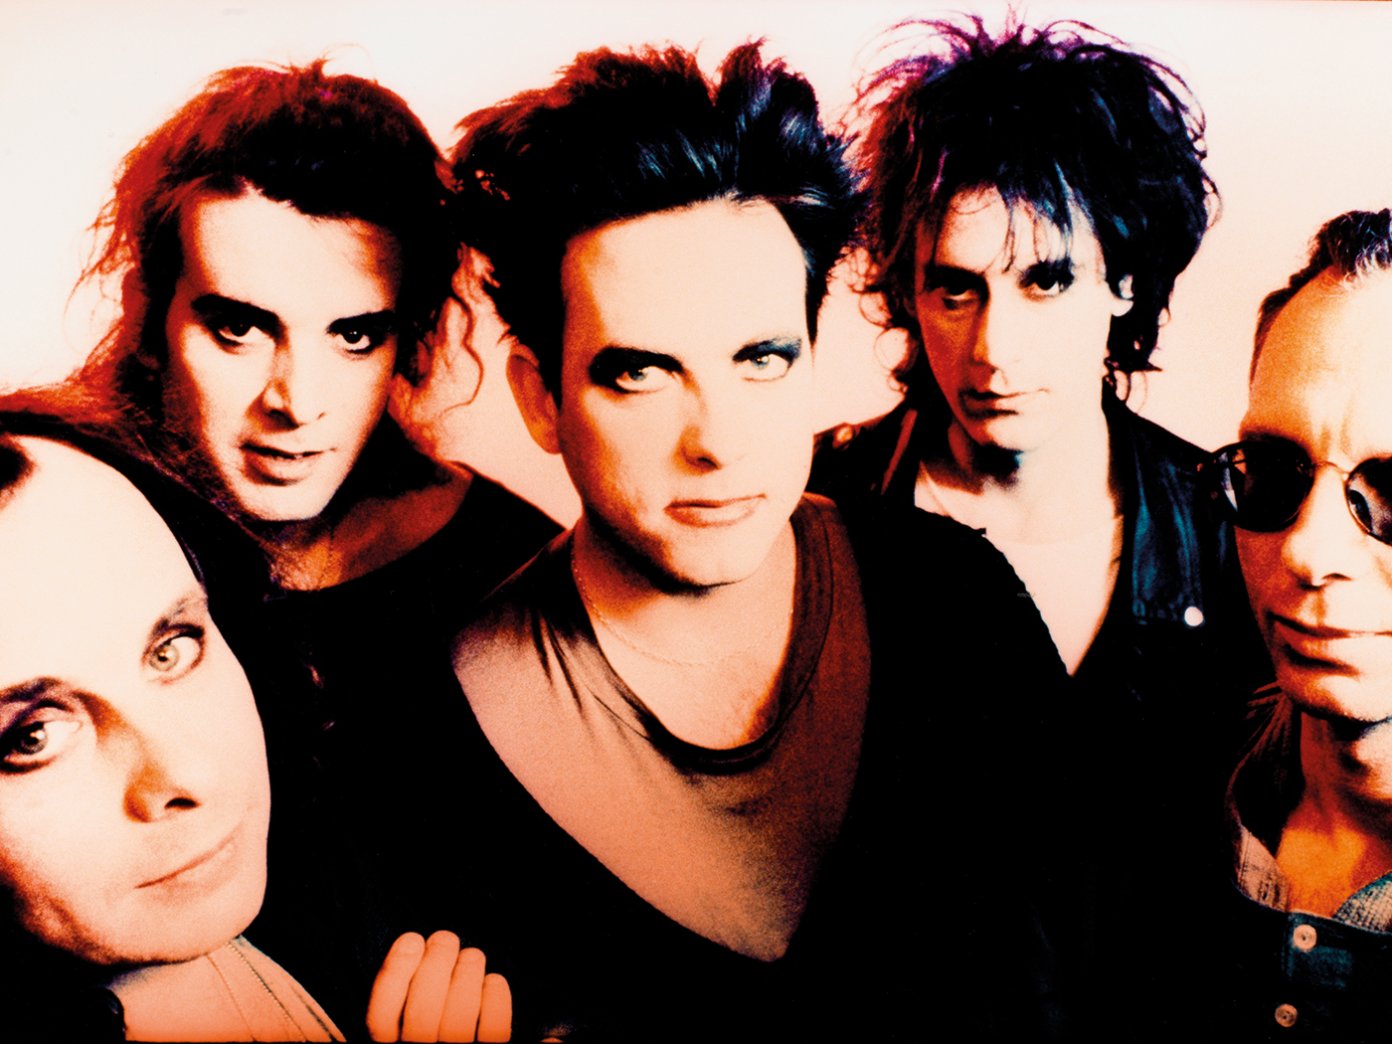 the cure live wish tour 1992 full